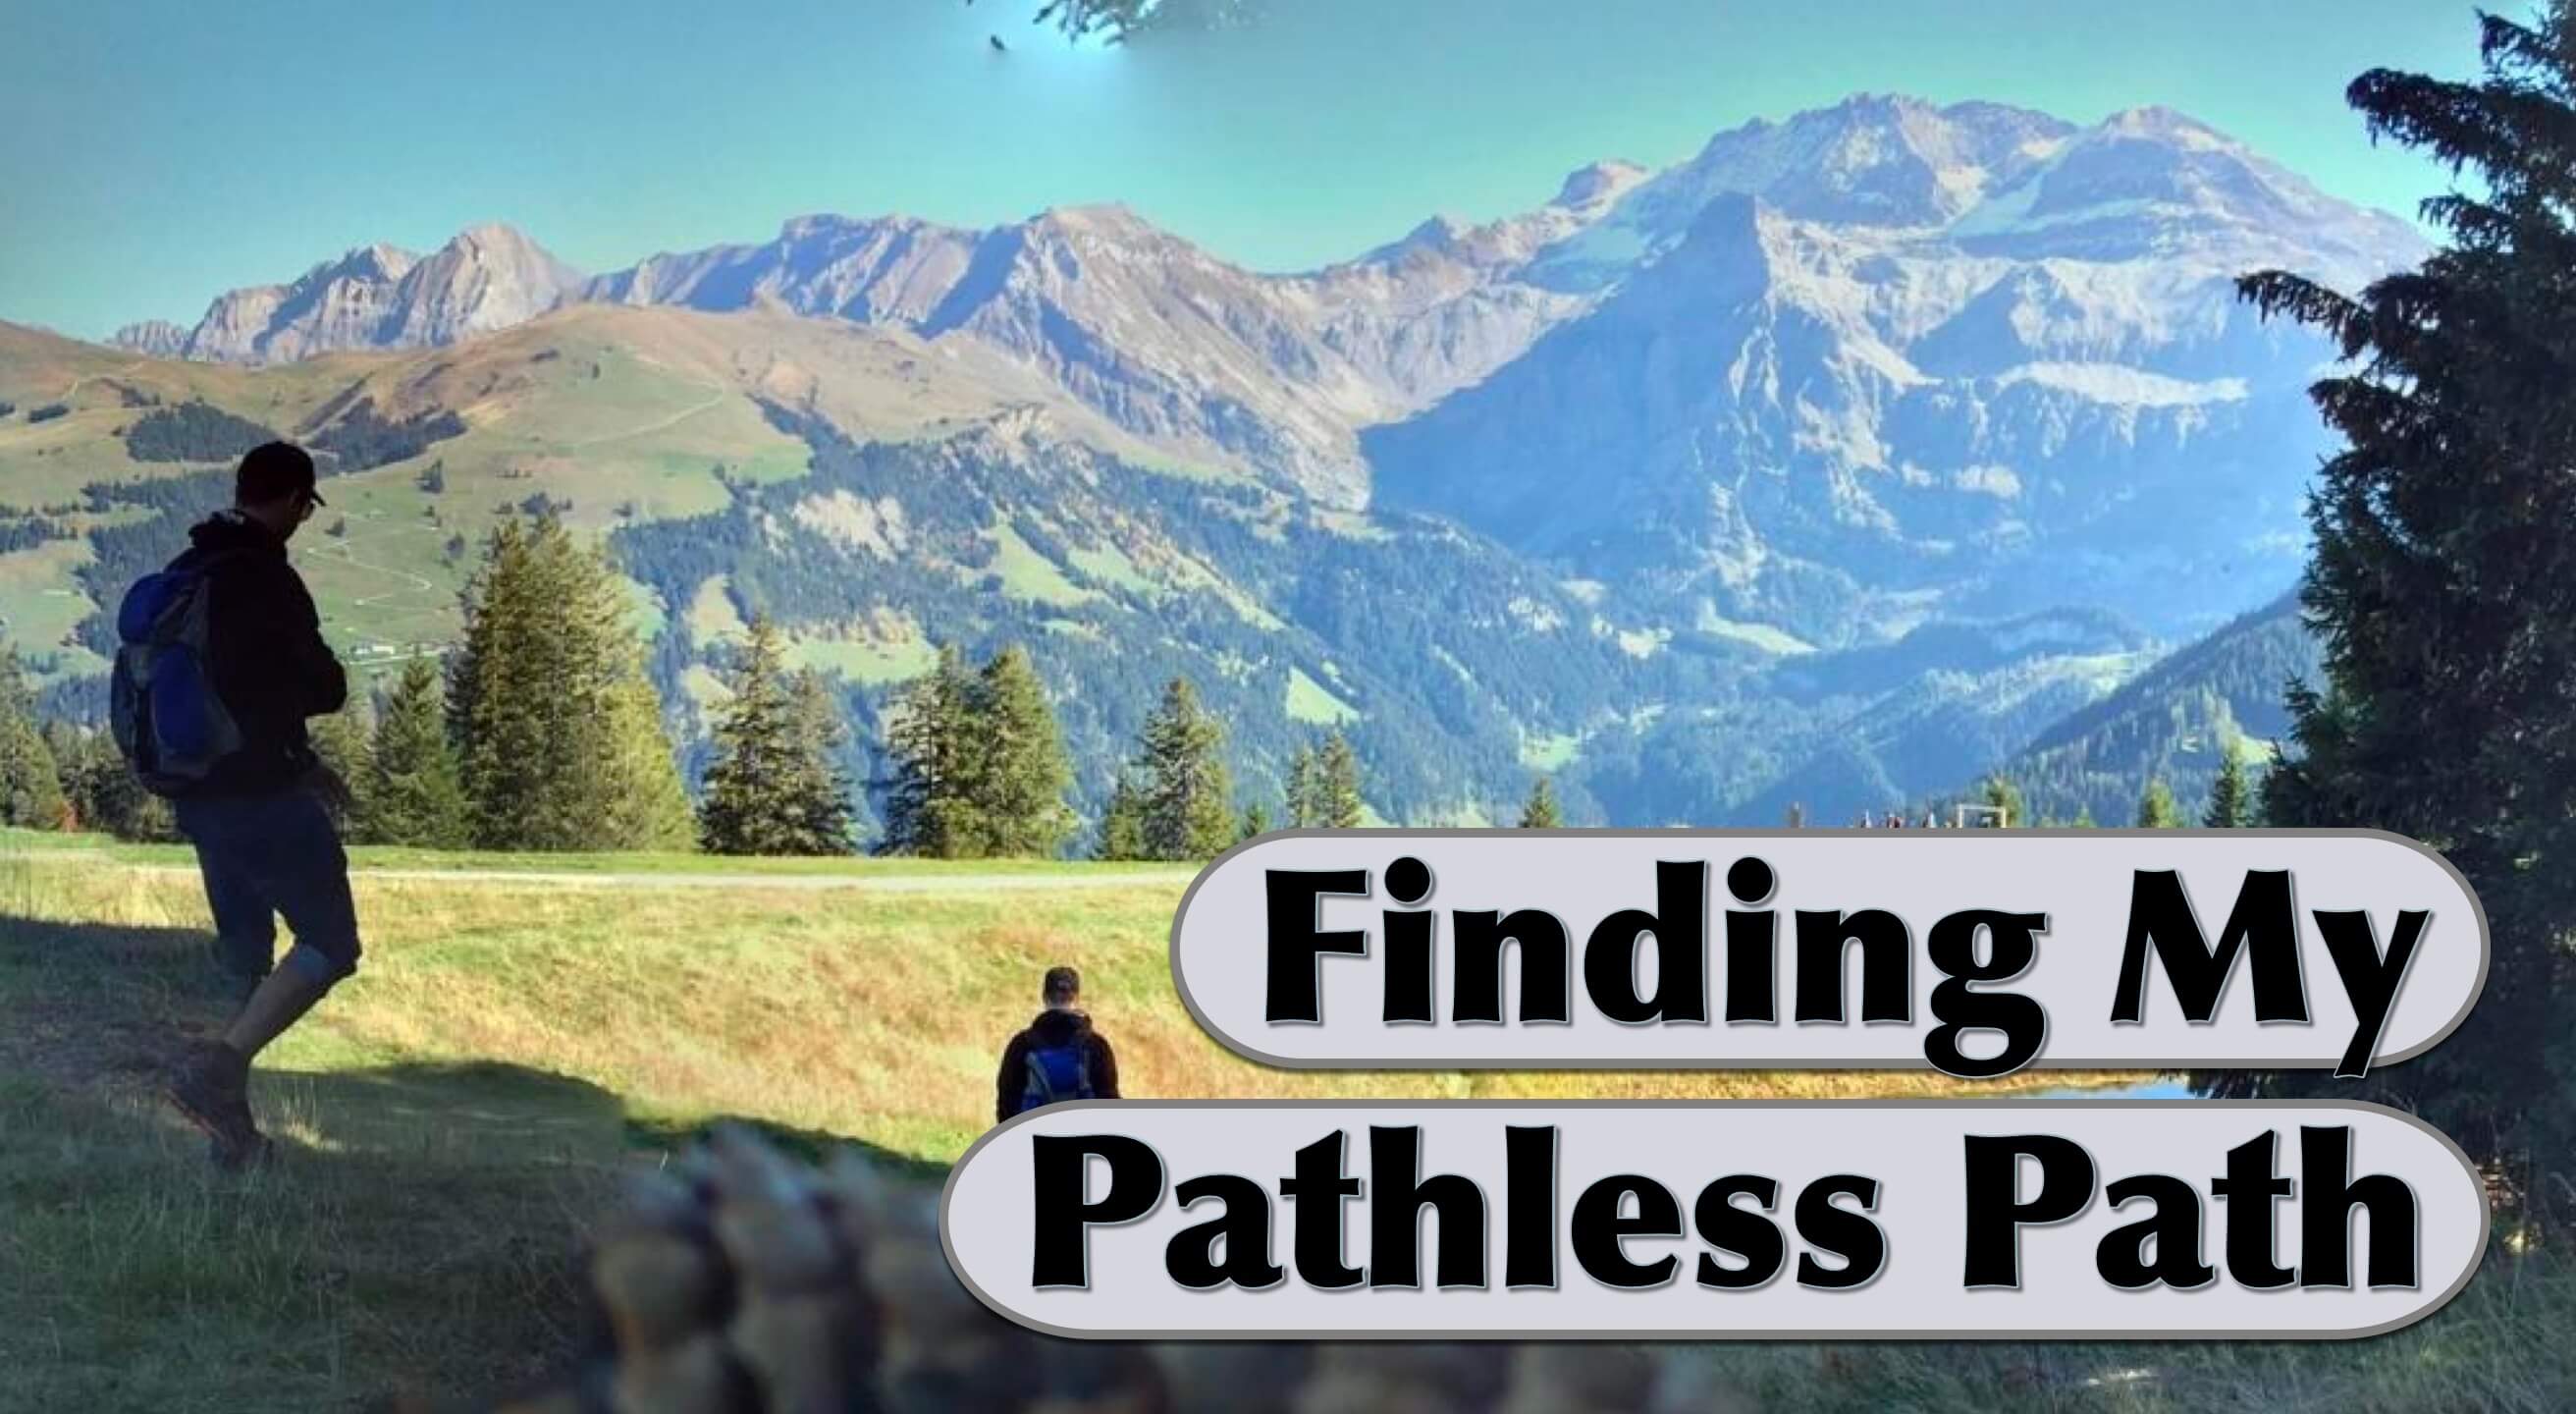 Finding My Pathless Path